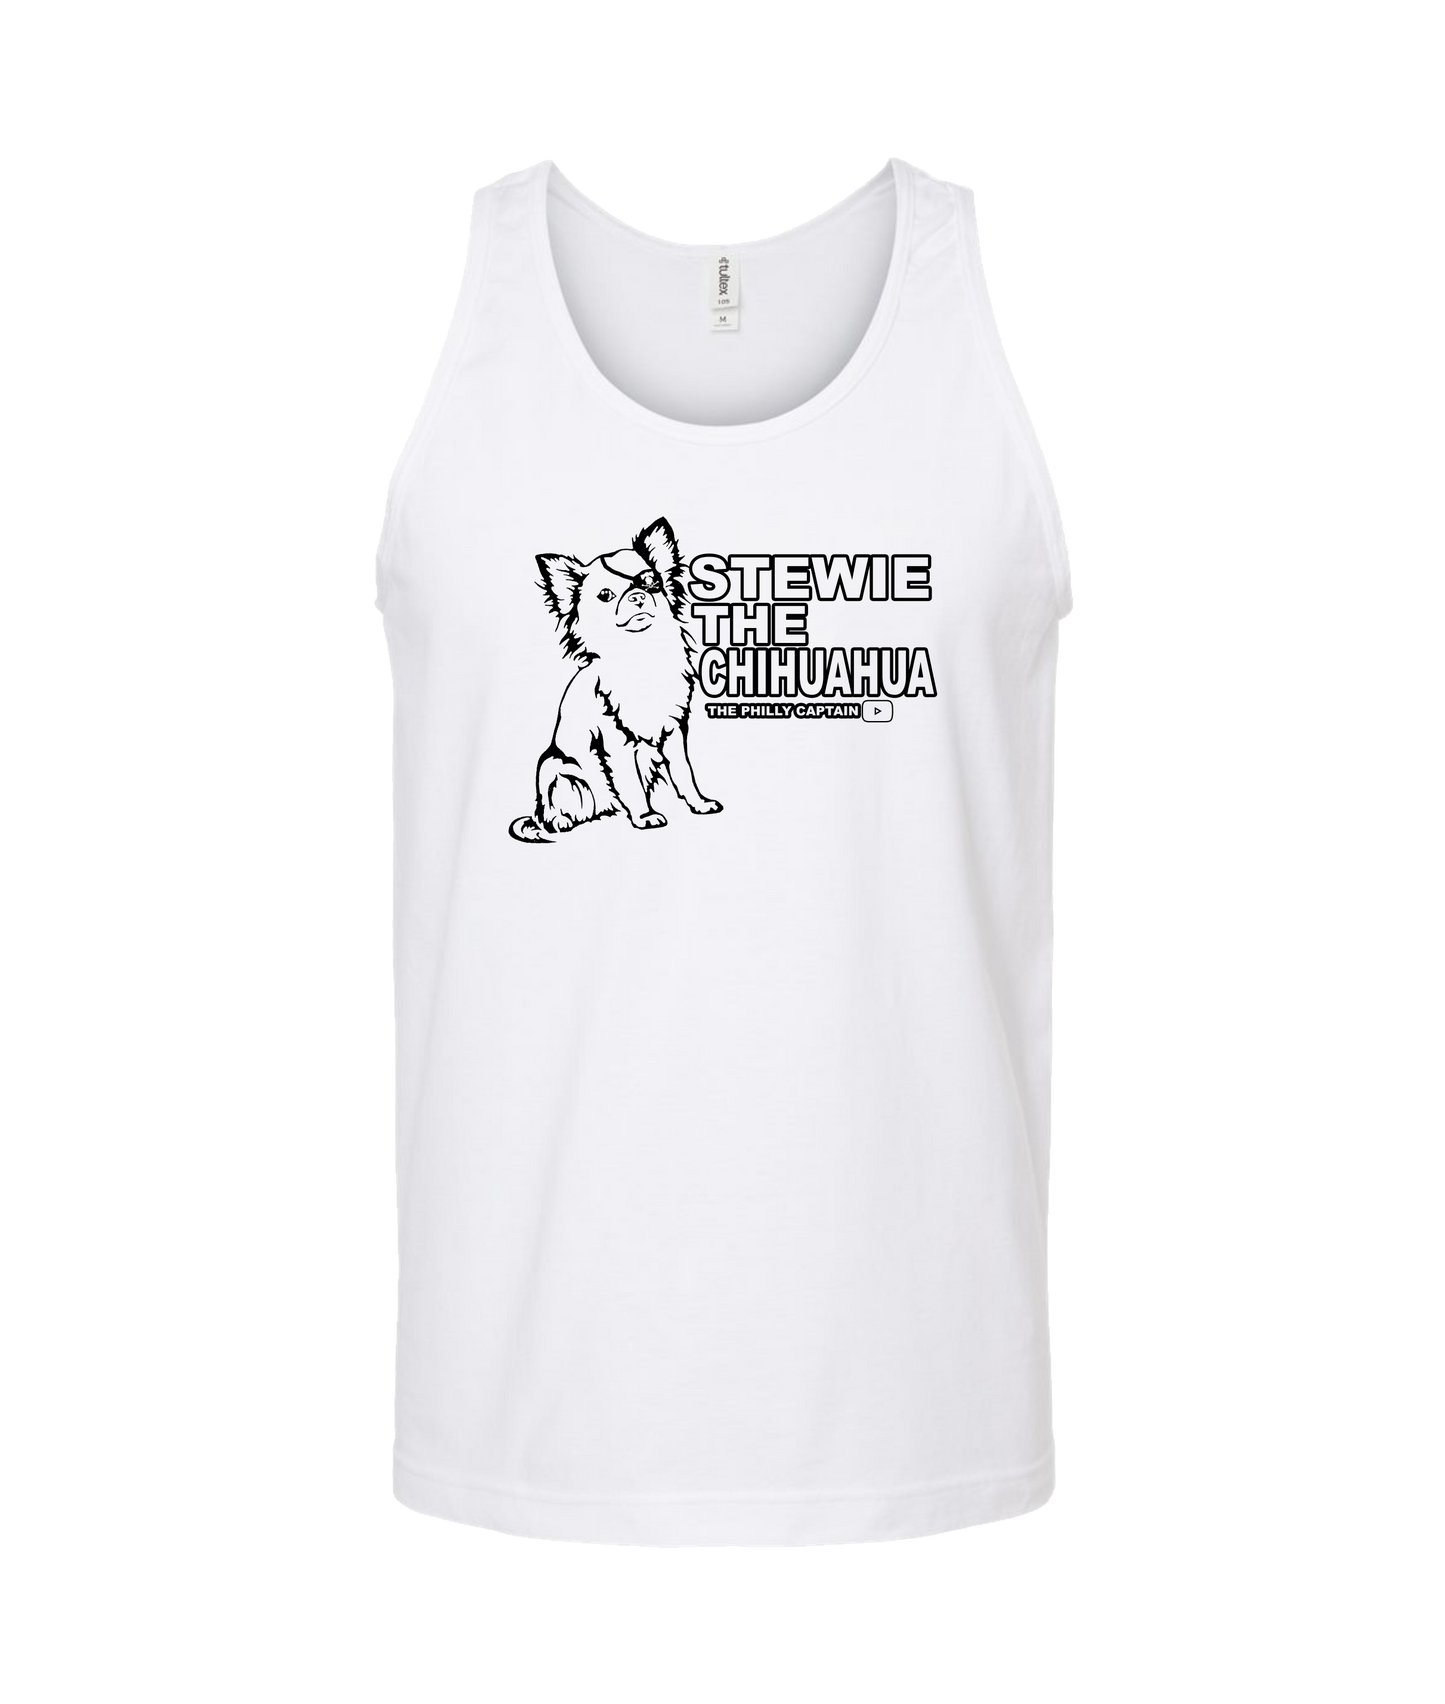 The Philly Captain's Merch is Fire - Stewie the Chihuahua - White Tank Top